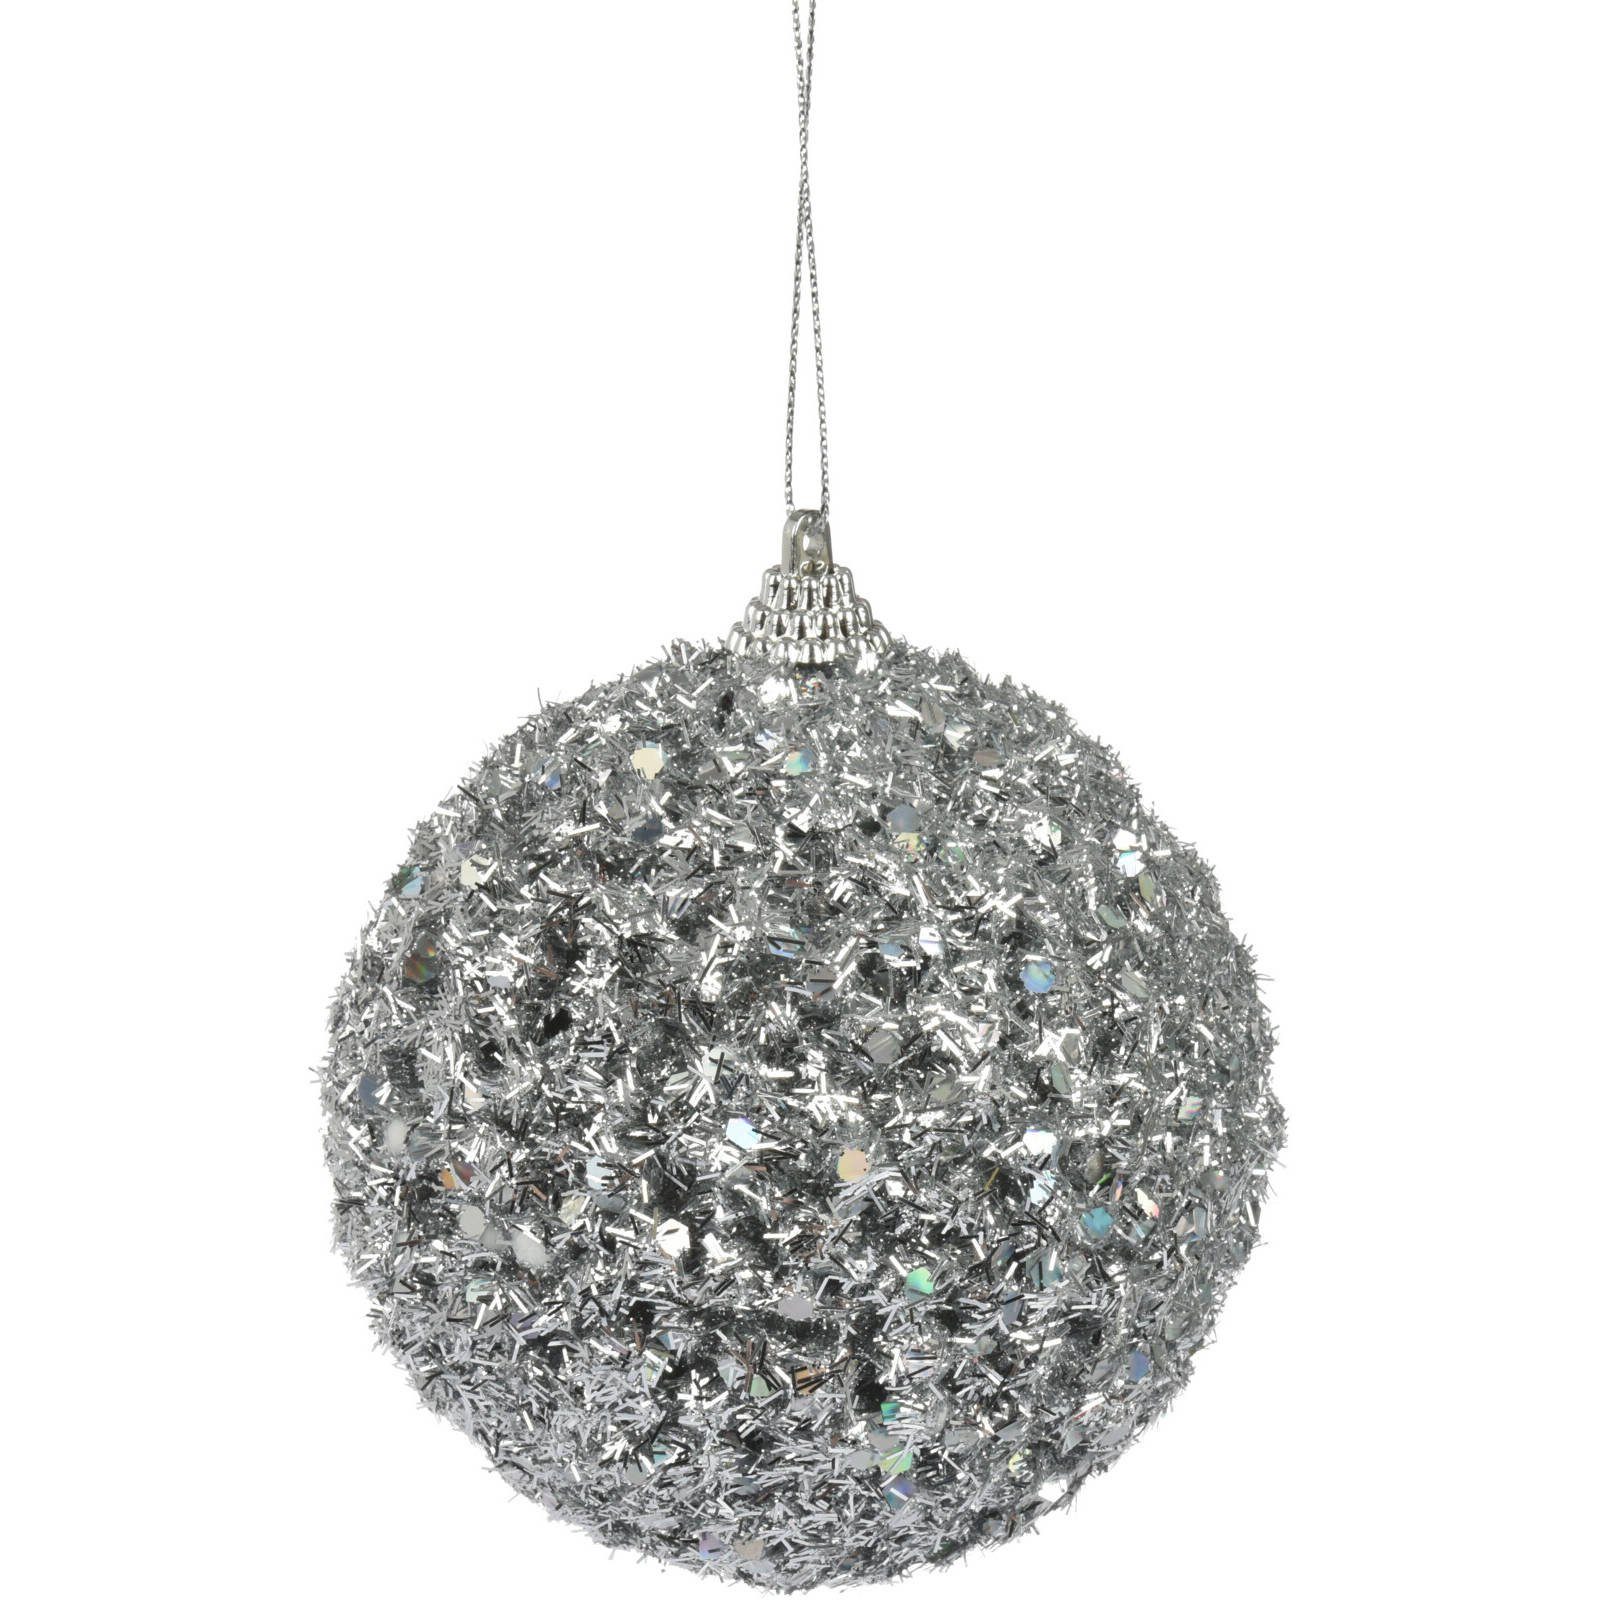 Home & styling collection Silber Weihnachtsbaumkugel